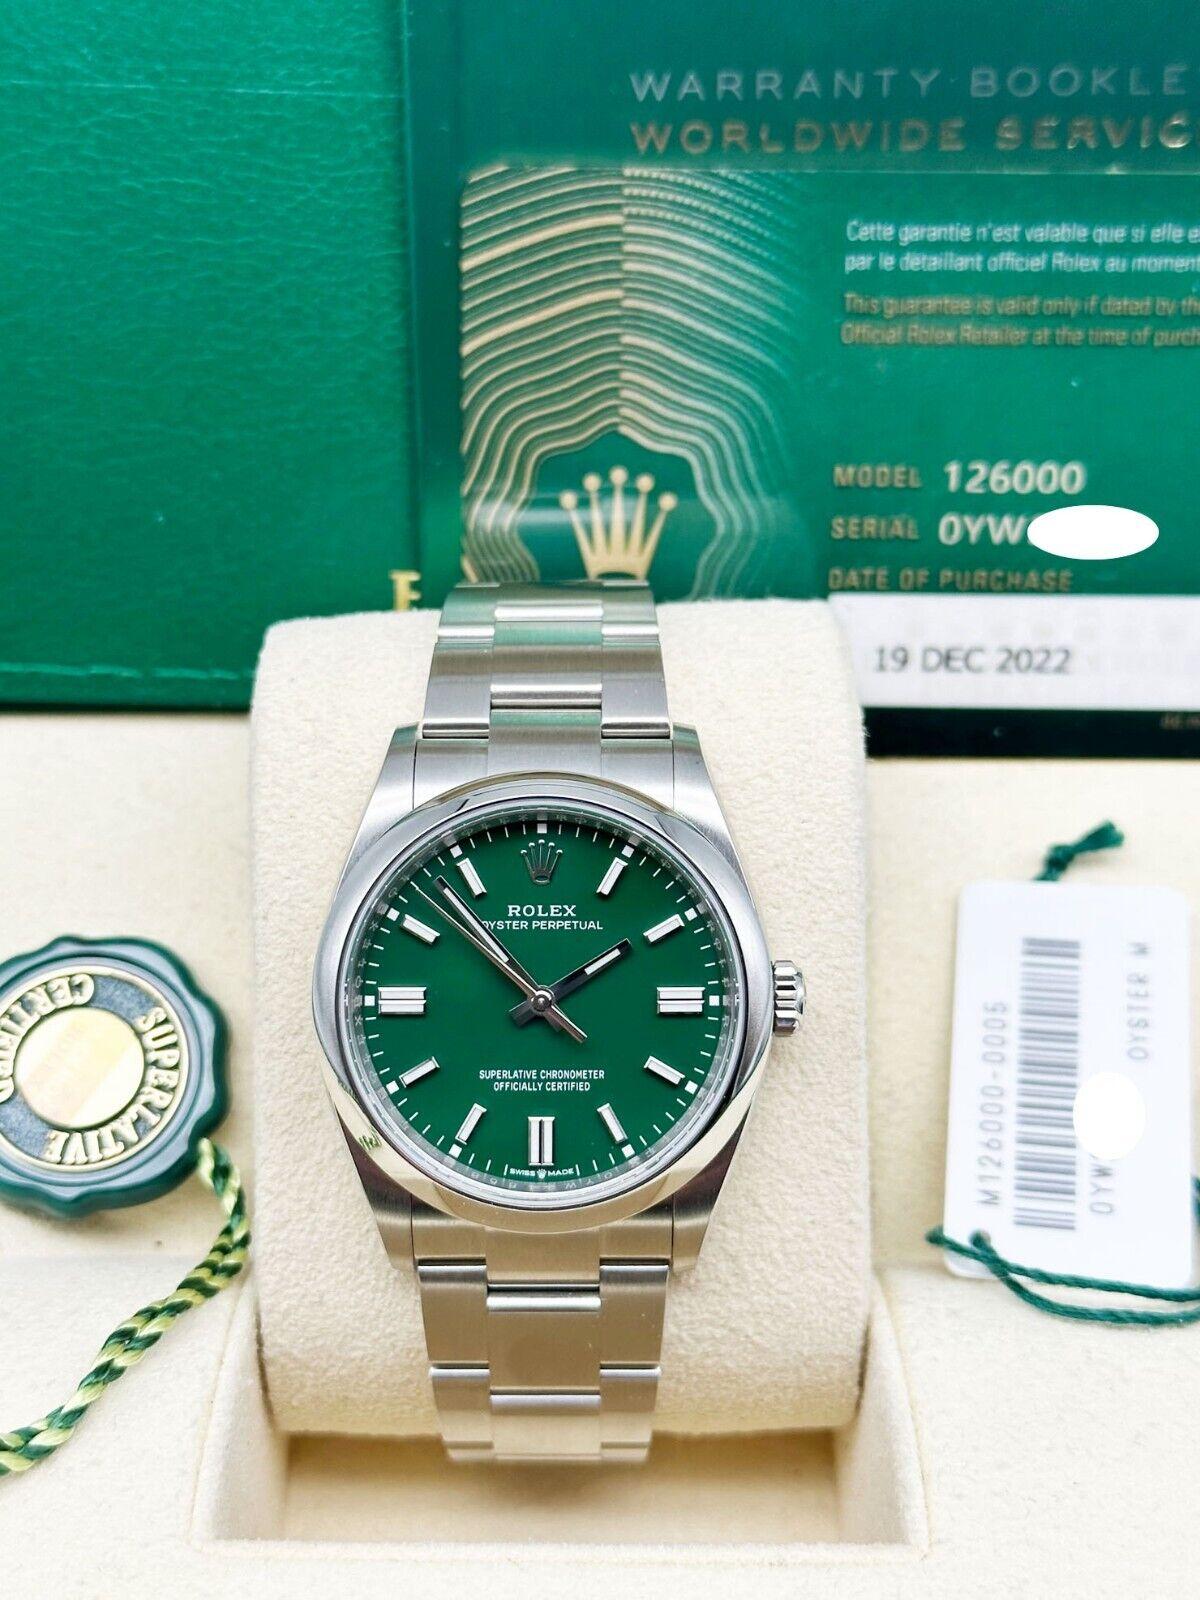 Style Number: 126000

Serial: 0YW21***

Year: 2022

Model: Oyster Perpetual 

Case Material: Stainless Steel 

Band: Stainless Steel 

Bezel: Stainless Steel 

Dial: Green 

Face: Sapphire Crystal 

Case Size: 36mm 

Includes: 

-Rolex Box &